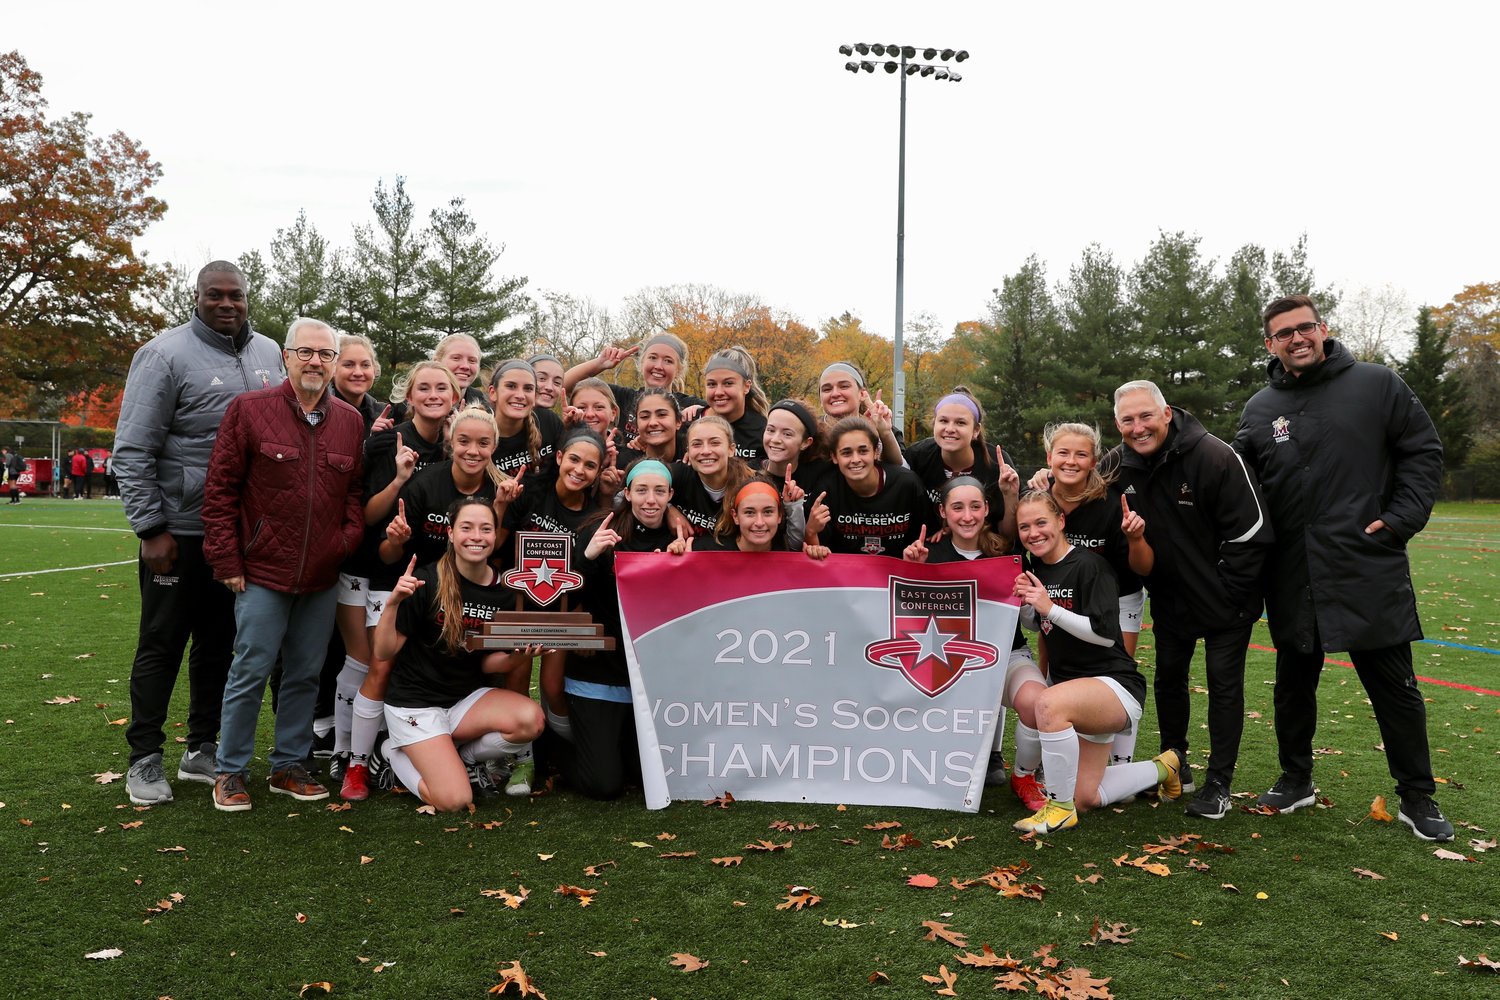 Senior Dana Poetzsch’s double-overtime goal secured the East Coast Conference title for the Molloy women’s soccer team. The men also clinched a spot in the NCAA tournament.